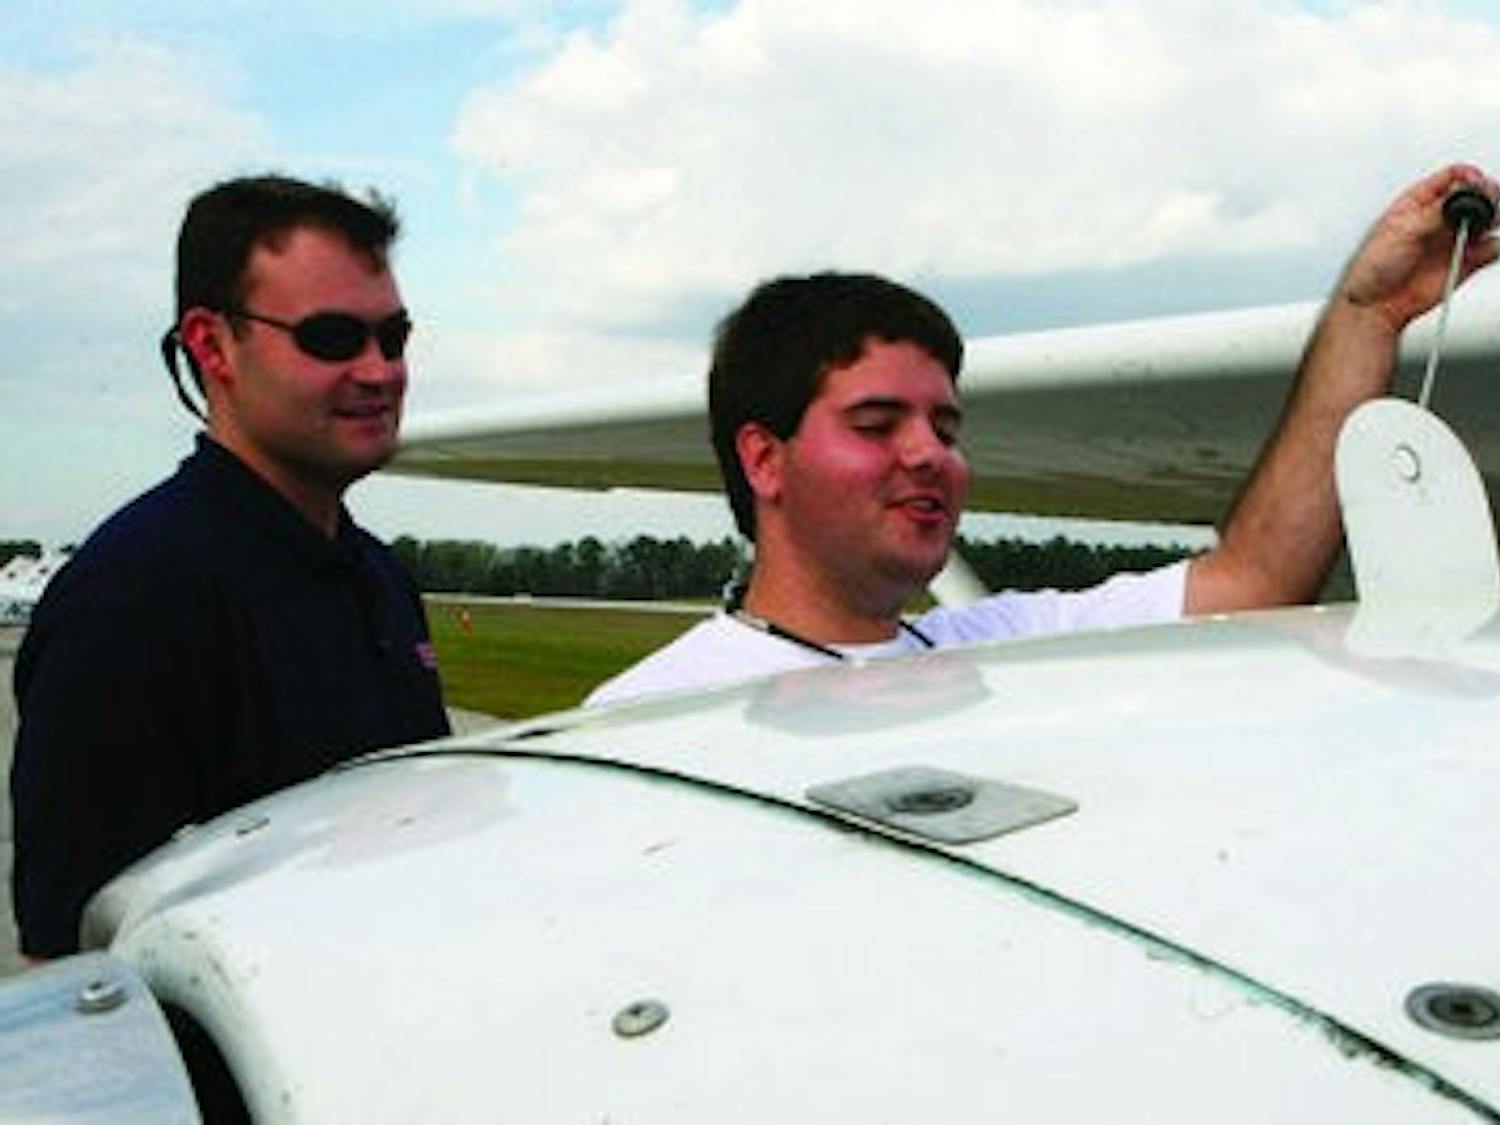 Joe McDonald, right, senior in aviation management, checks the oil of a single-engine propeller plane with instructor Matt Jones. Auburn Aviation offers discounted starter lessons to those interested in earning their wings. (Rebecca Croomes / PHOTO EDITOR)